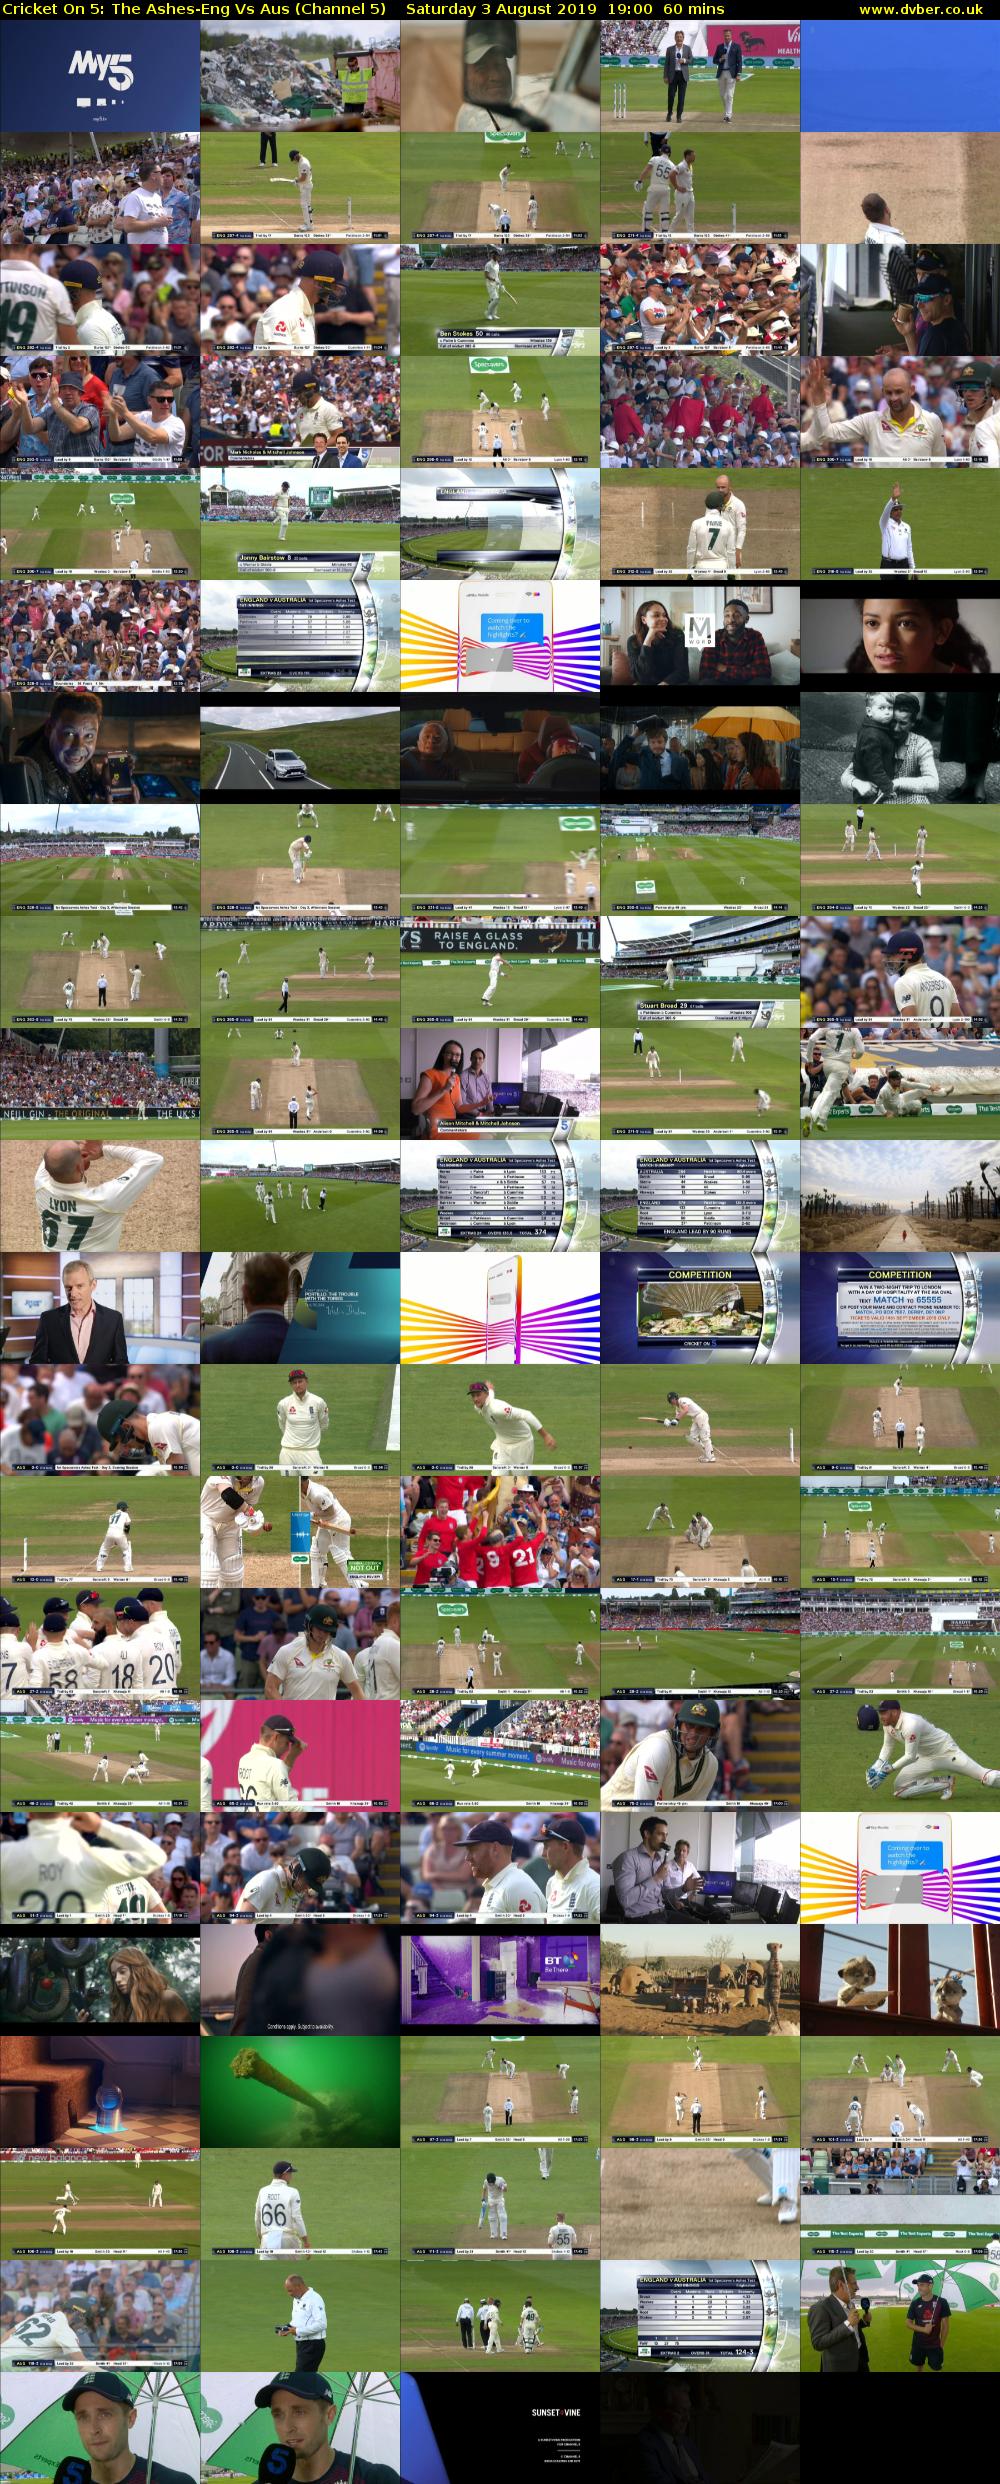 Cricket On 5: The Ashes-Eng Vs Aus (Channel 5) Saturday 3 August 2019 19:00 - 20:00